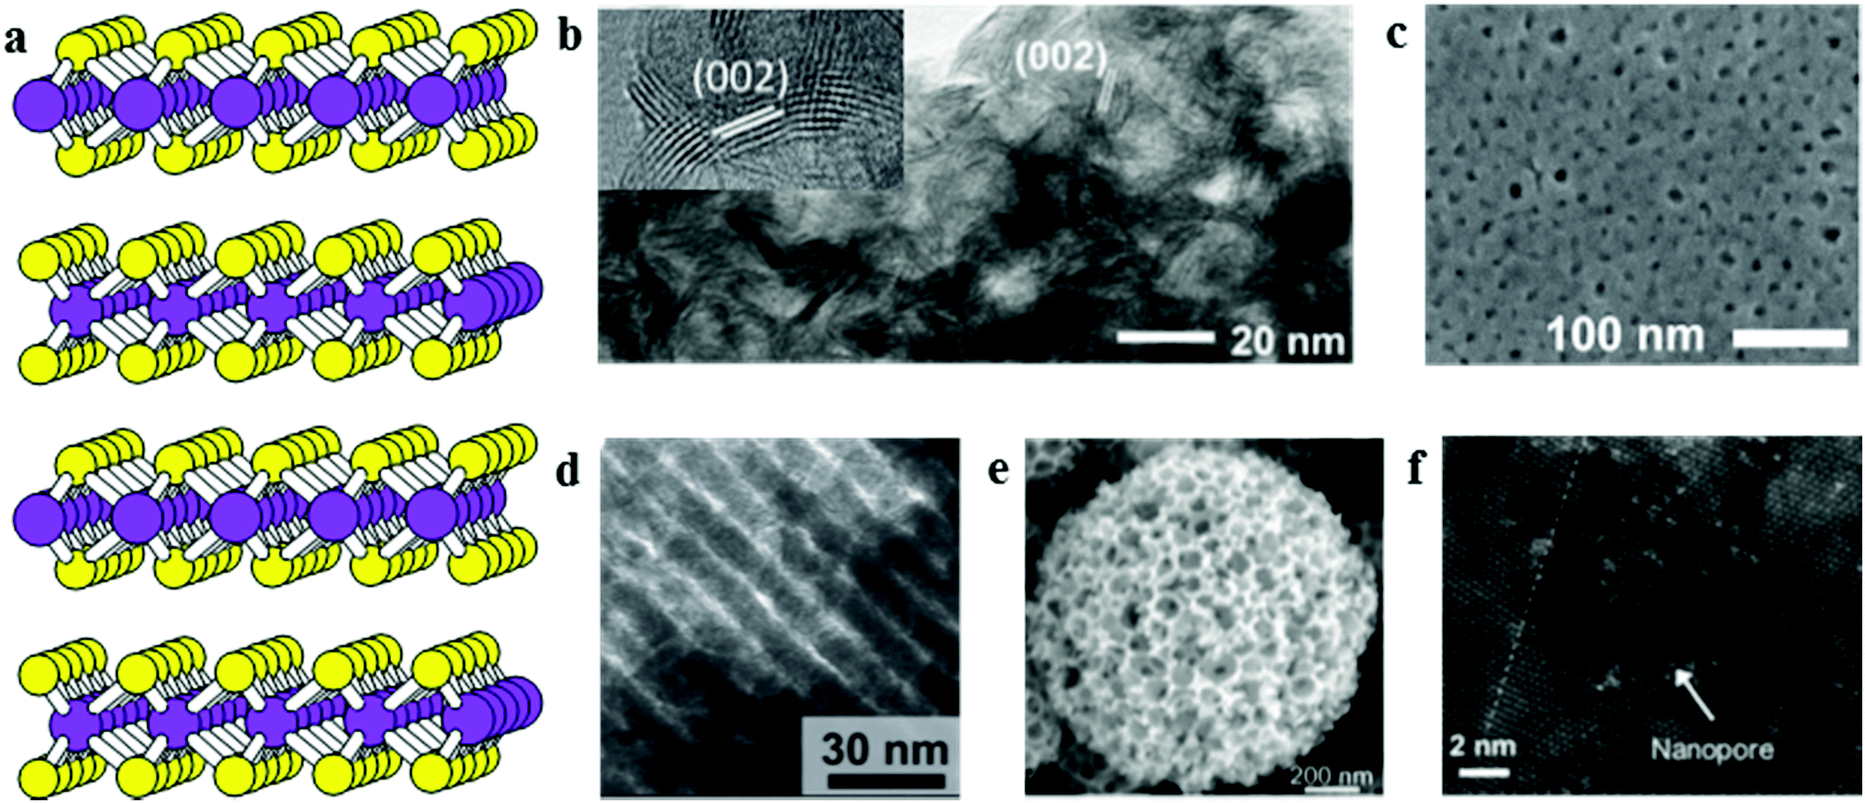 Strategies for development of nanoporous materials with 2D 